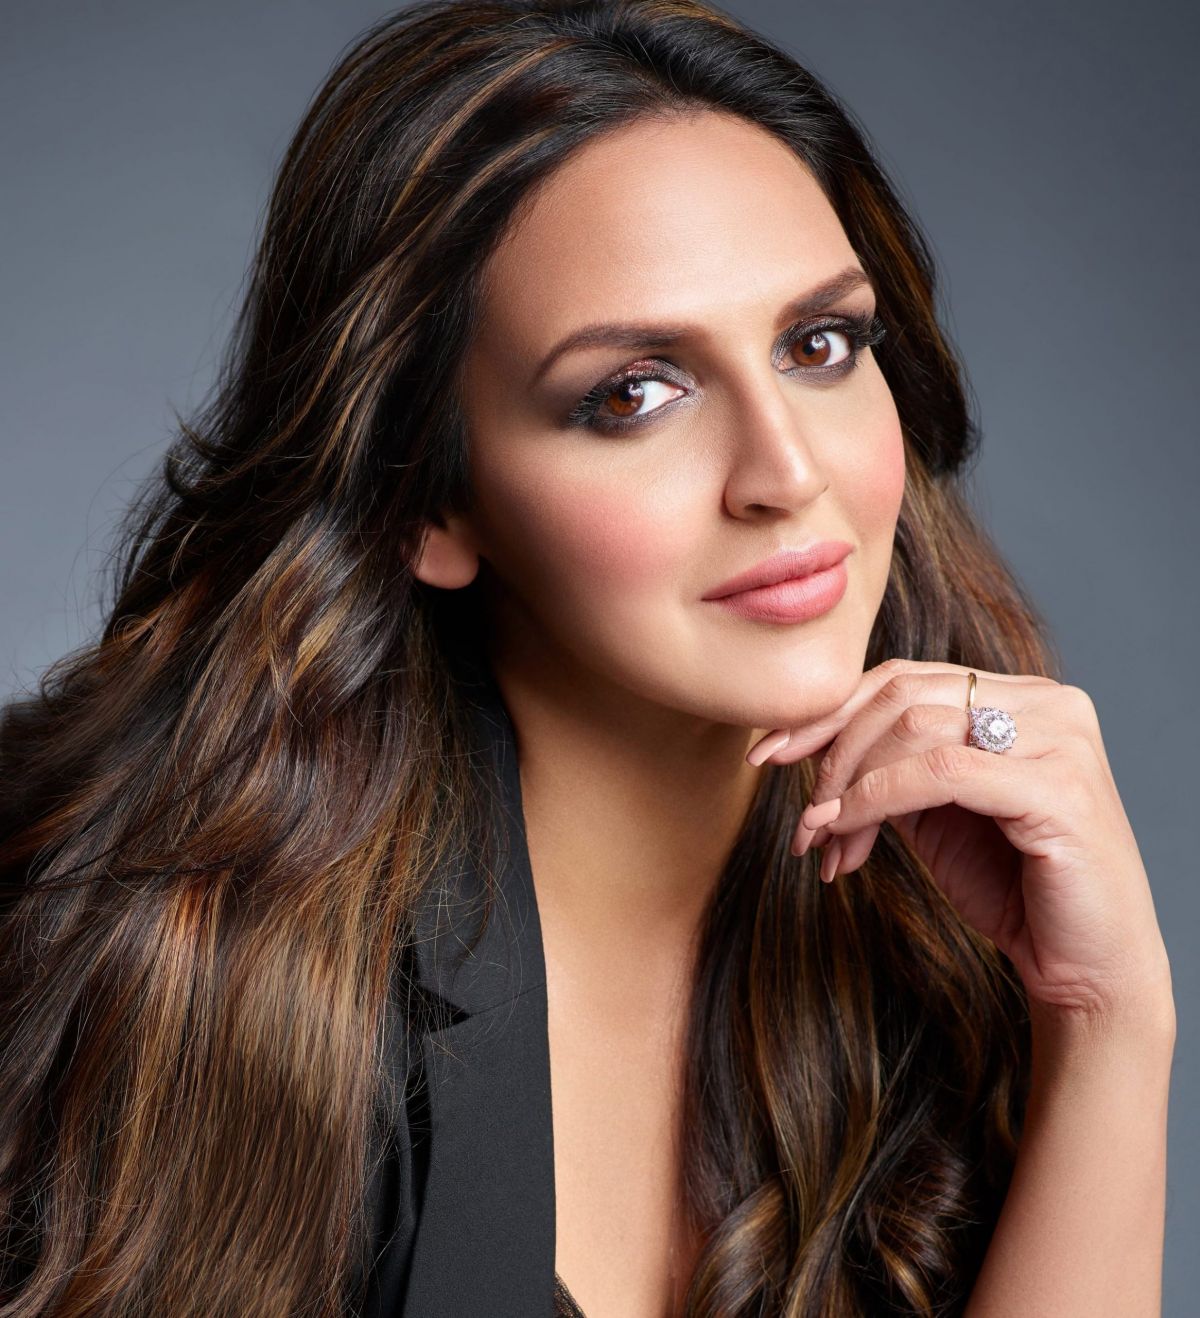 Know why Esha Deol made a distance from films?